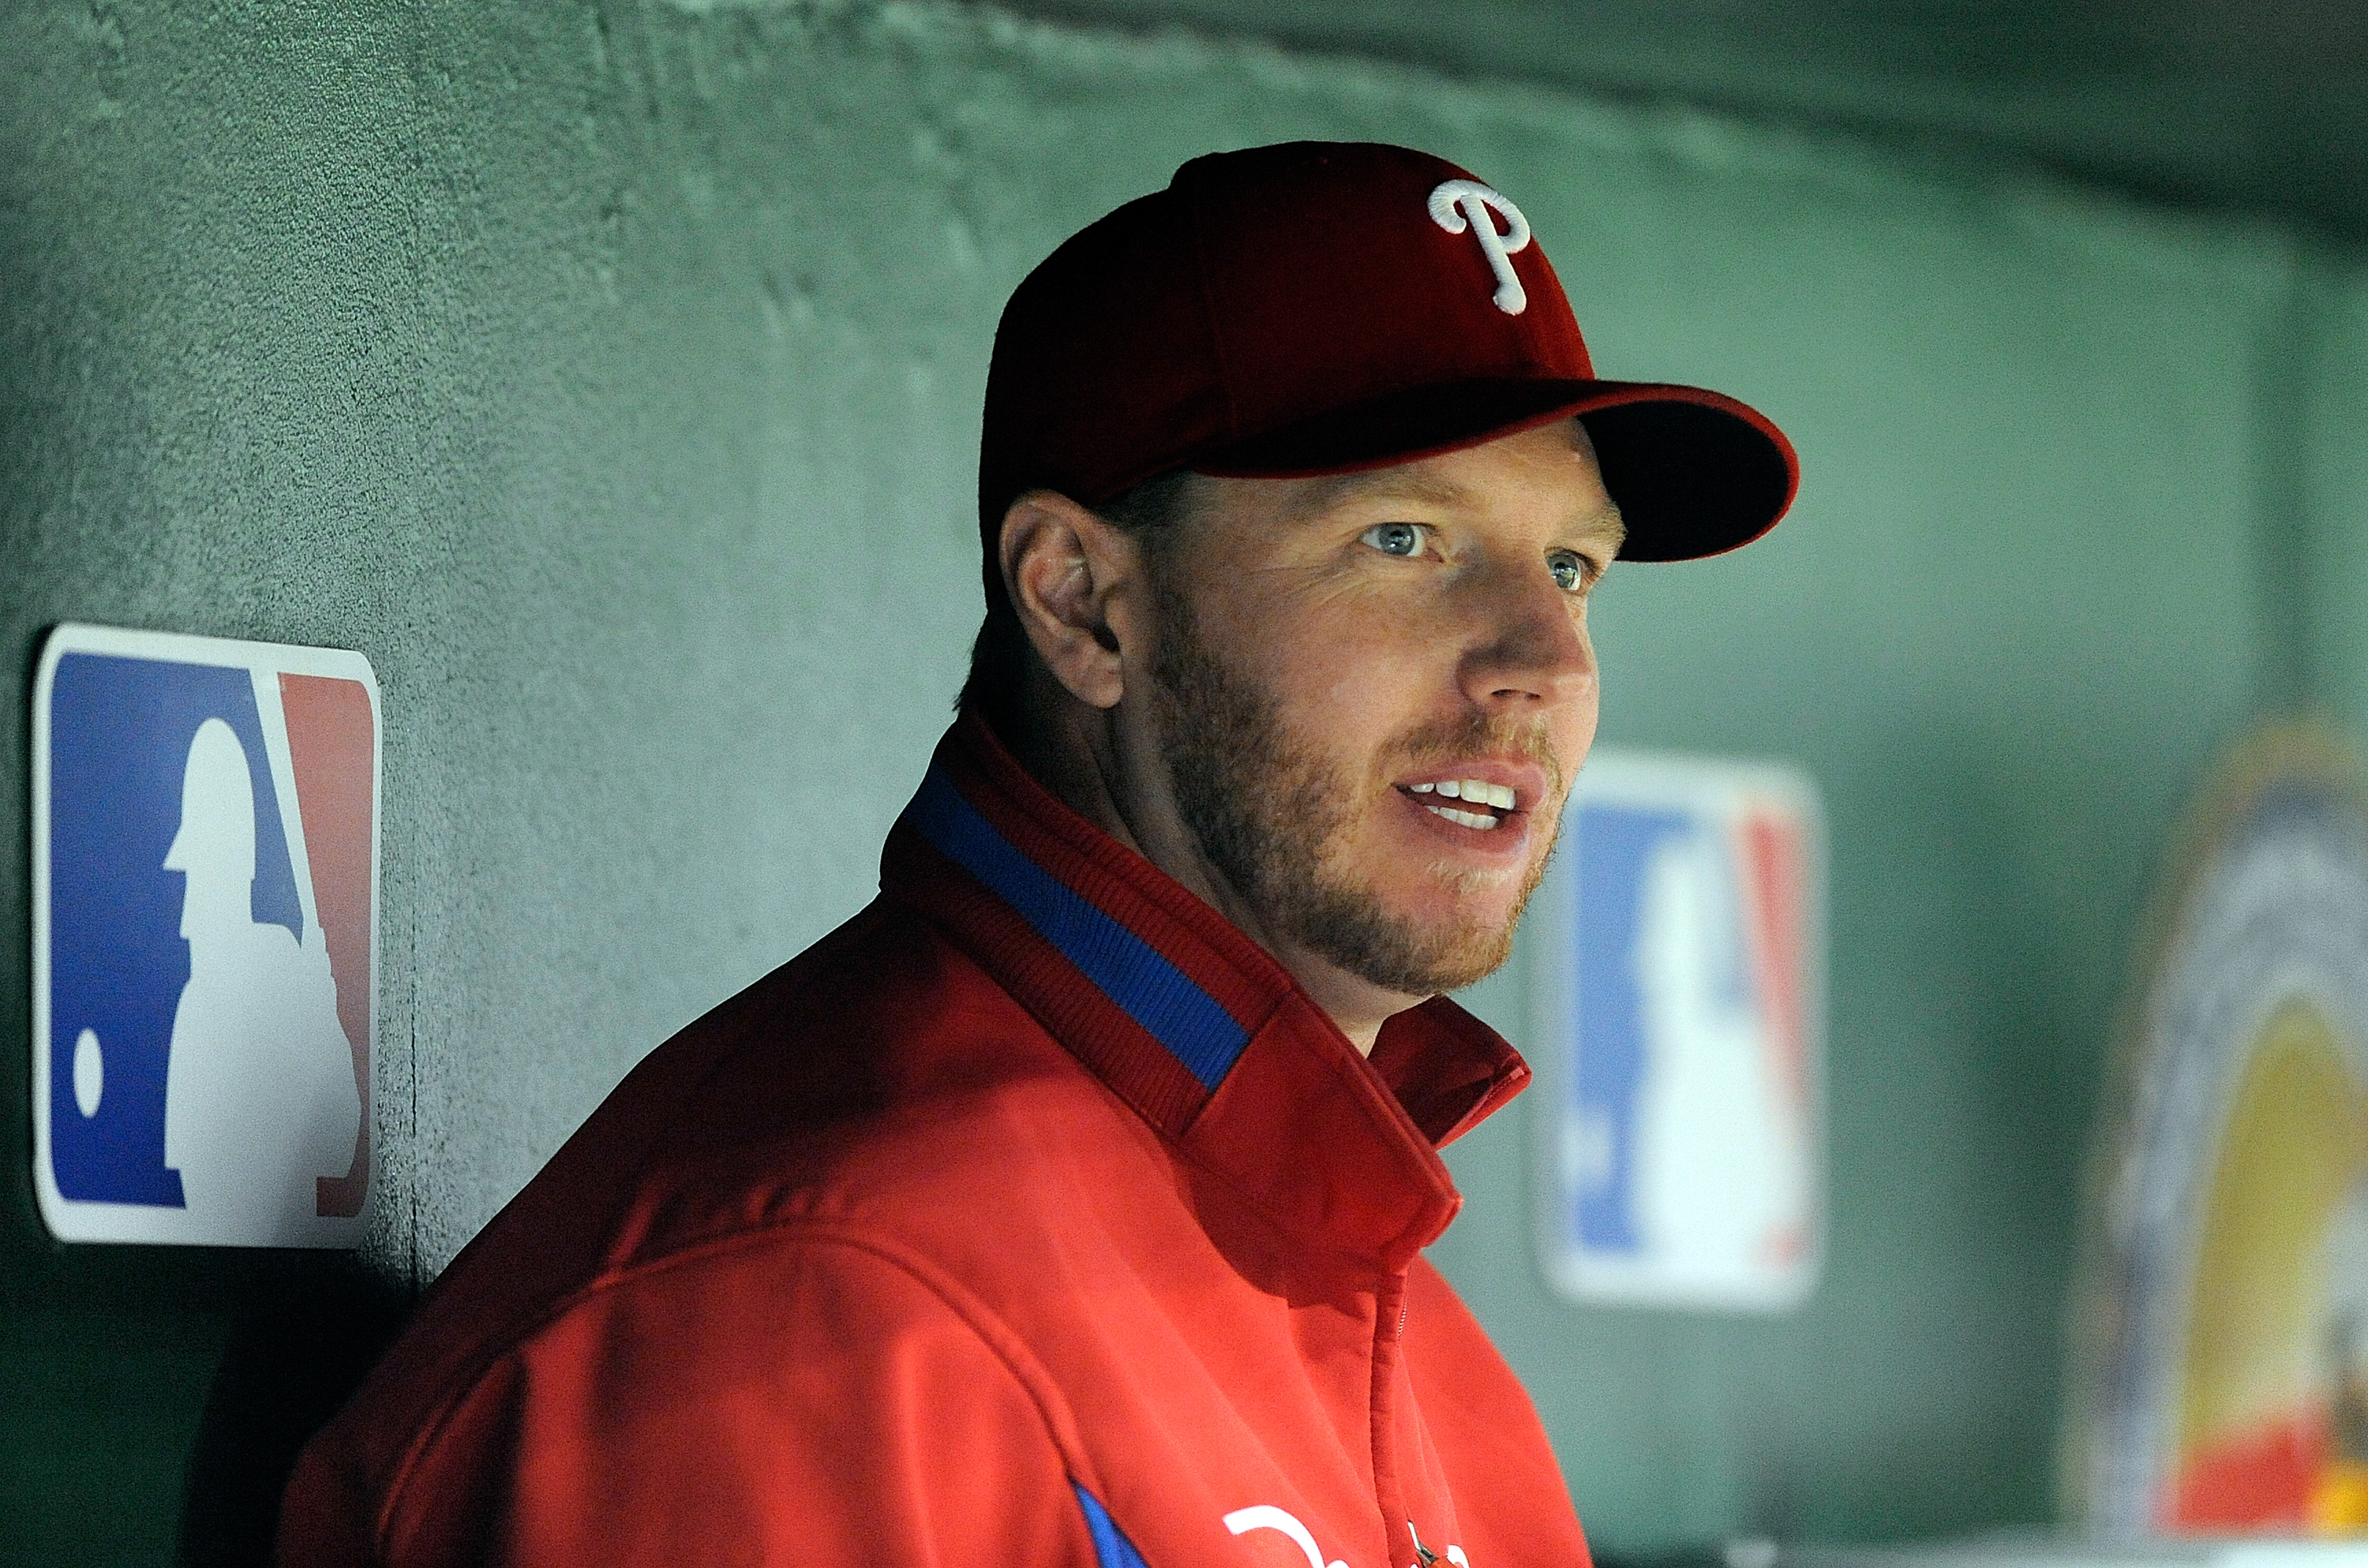 WASHINGTON - SEPTEMBER 29:  Roy Halladay #34 of the Philadelphia Phillies watches the game against the Washington Nationals at Nationals Park on September 29, 2010 in Washington, DC.  (Photo by Greg Fiume/Getty Images)